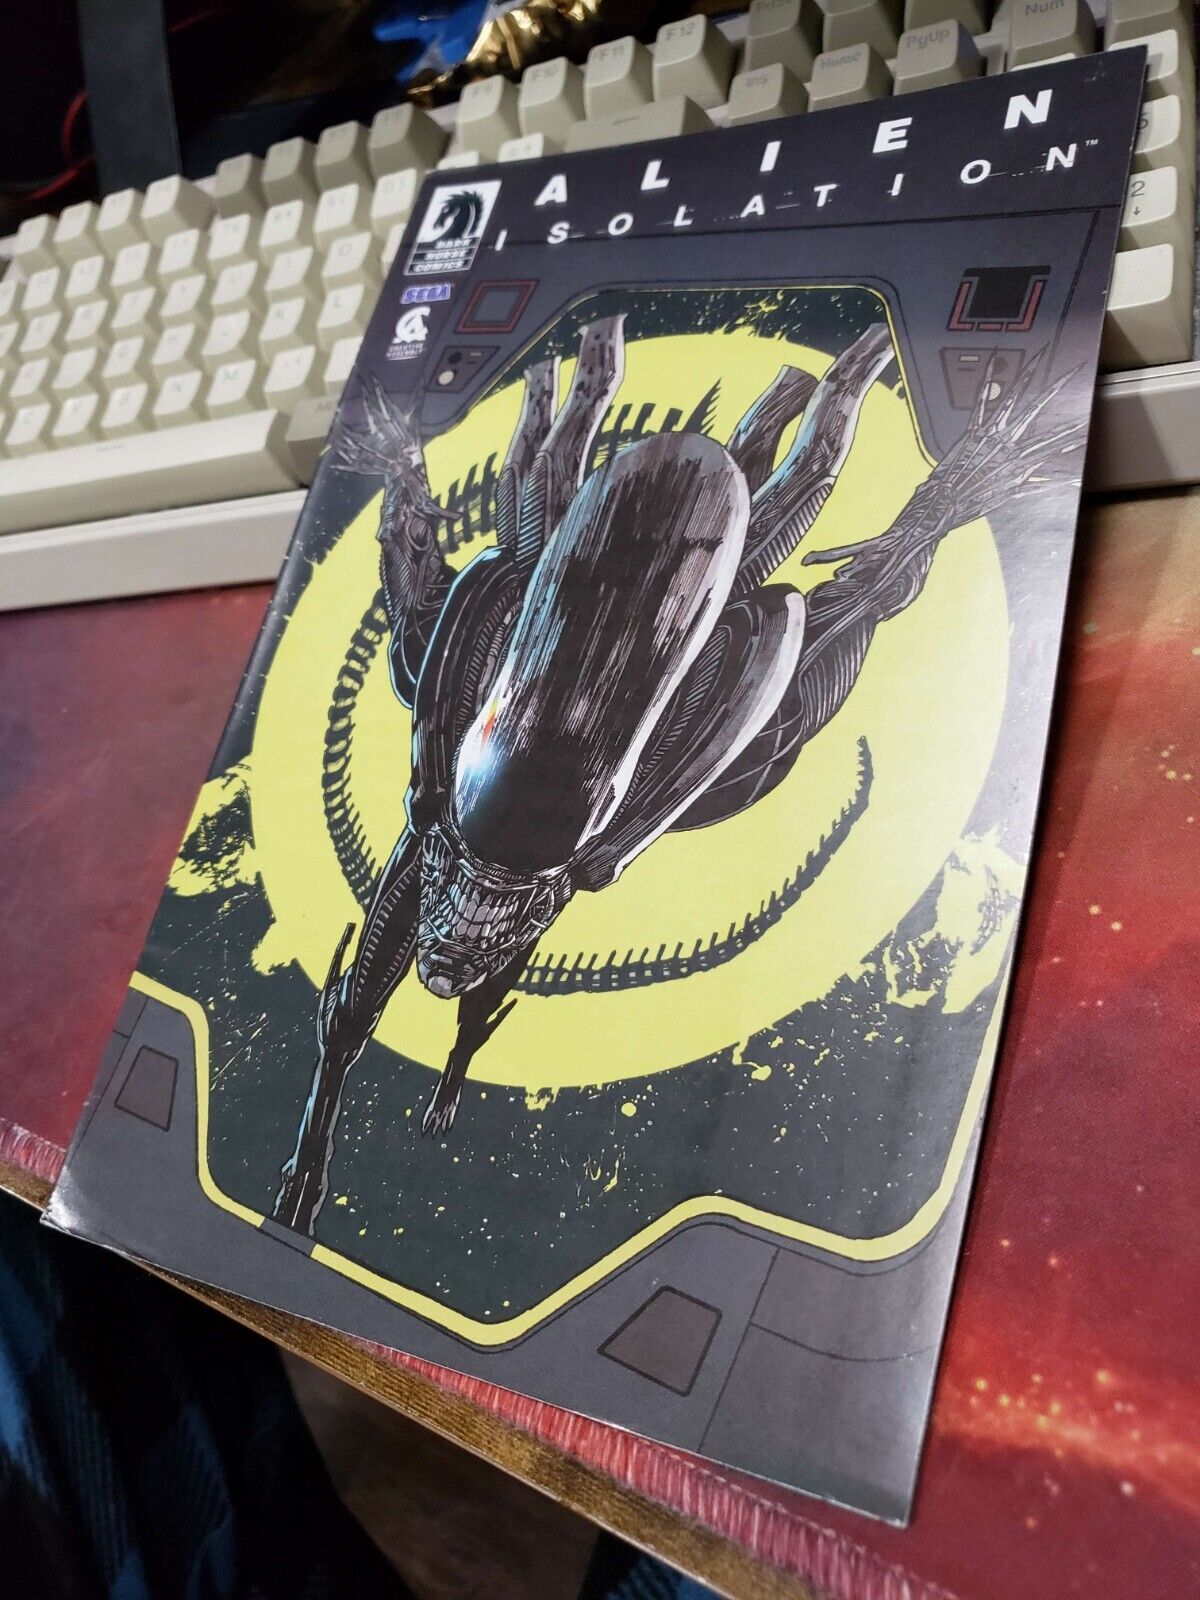 SDCC Alien Isolation Comic Book by Dan Abnett. Video Game Promo 2014